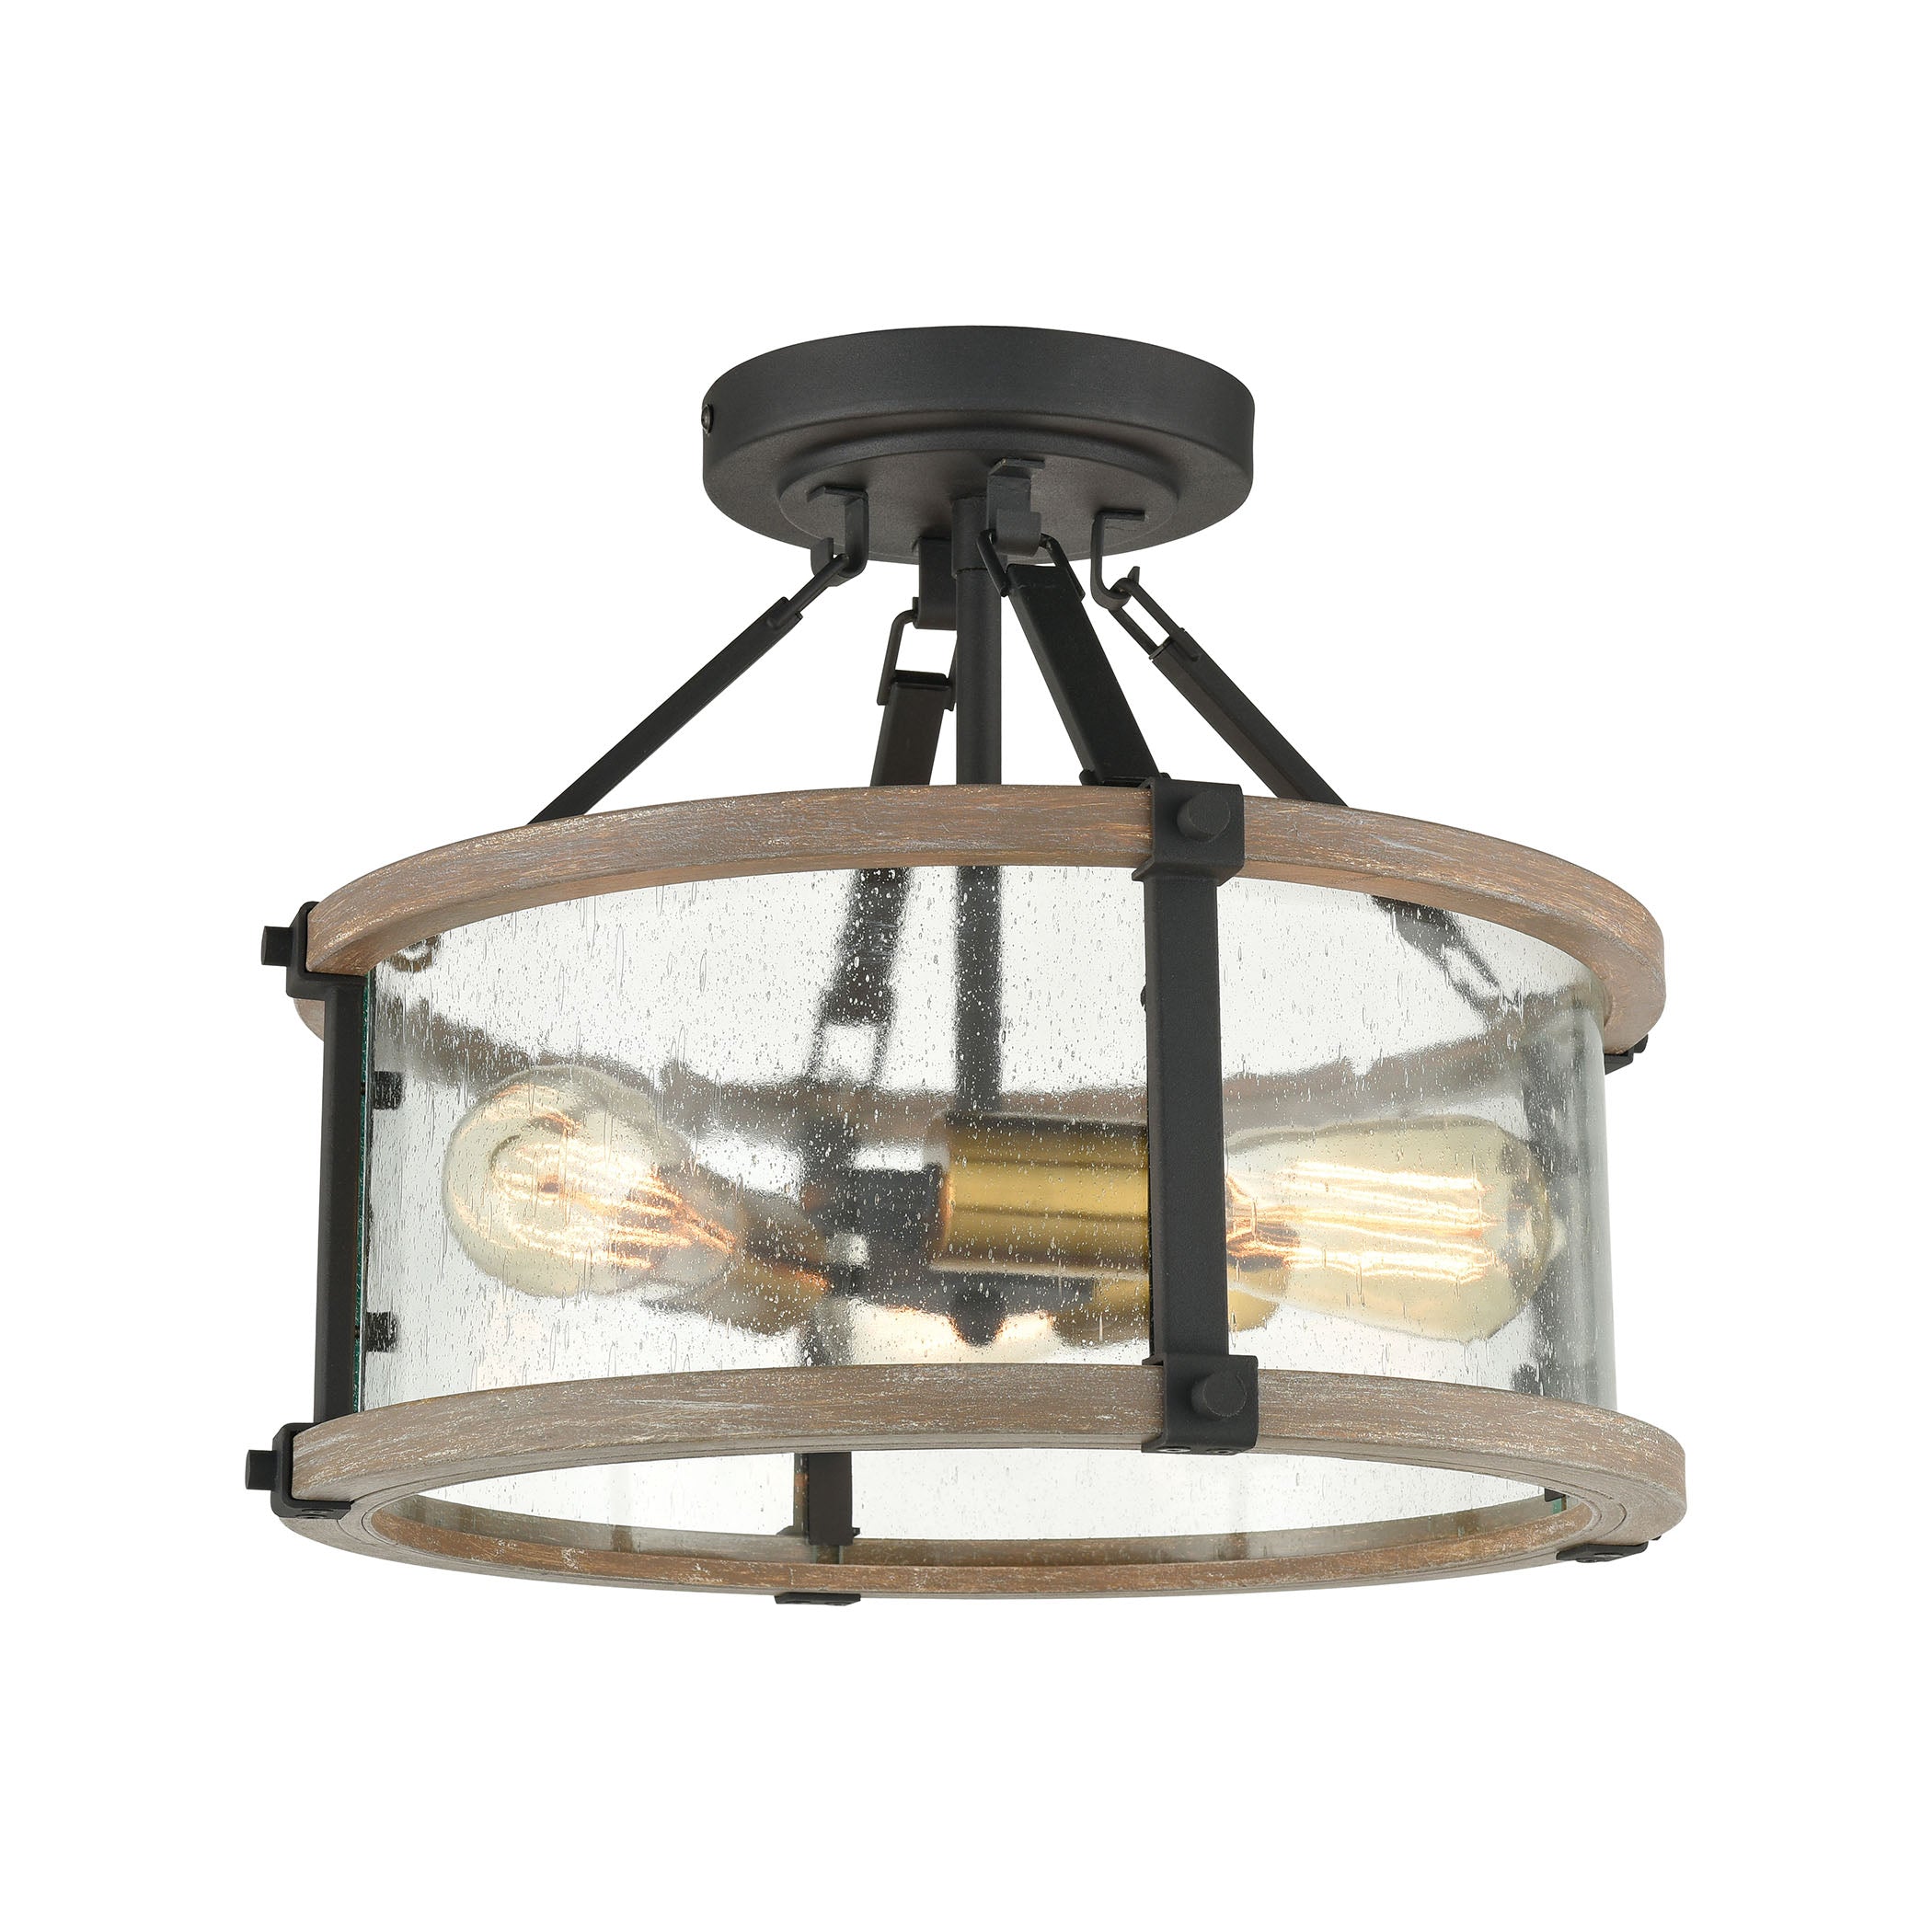 ELK Lighting 47286/3 Geringer 3-Light Semi Flush in Charcoal and Beechwood with Seedy Glass Enclosure